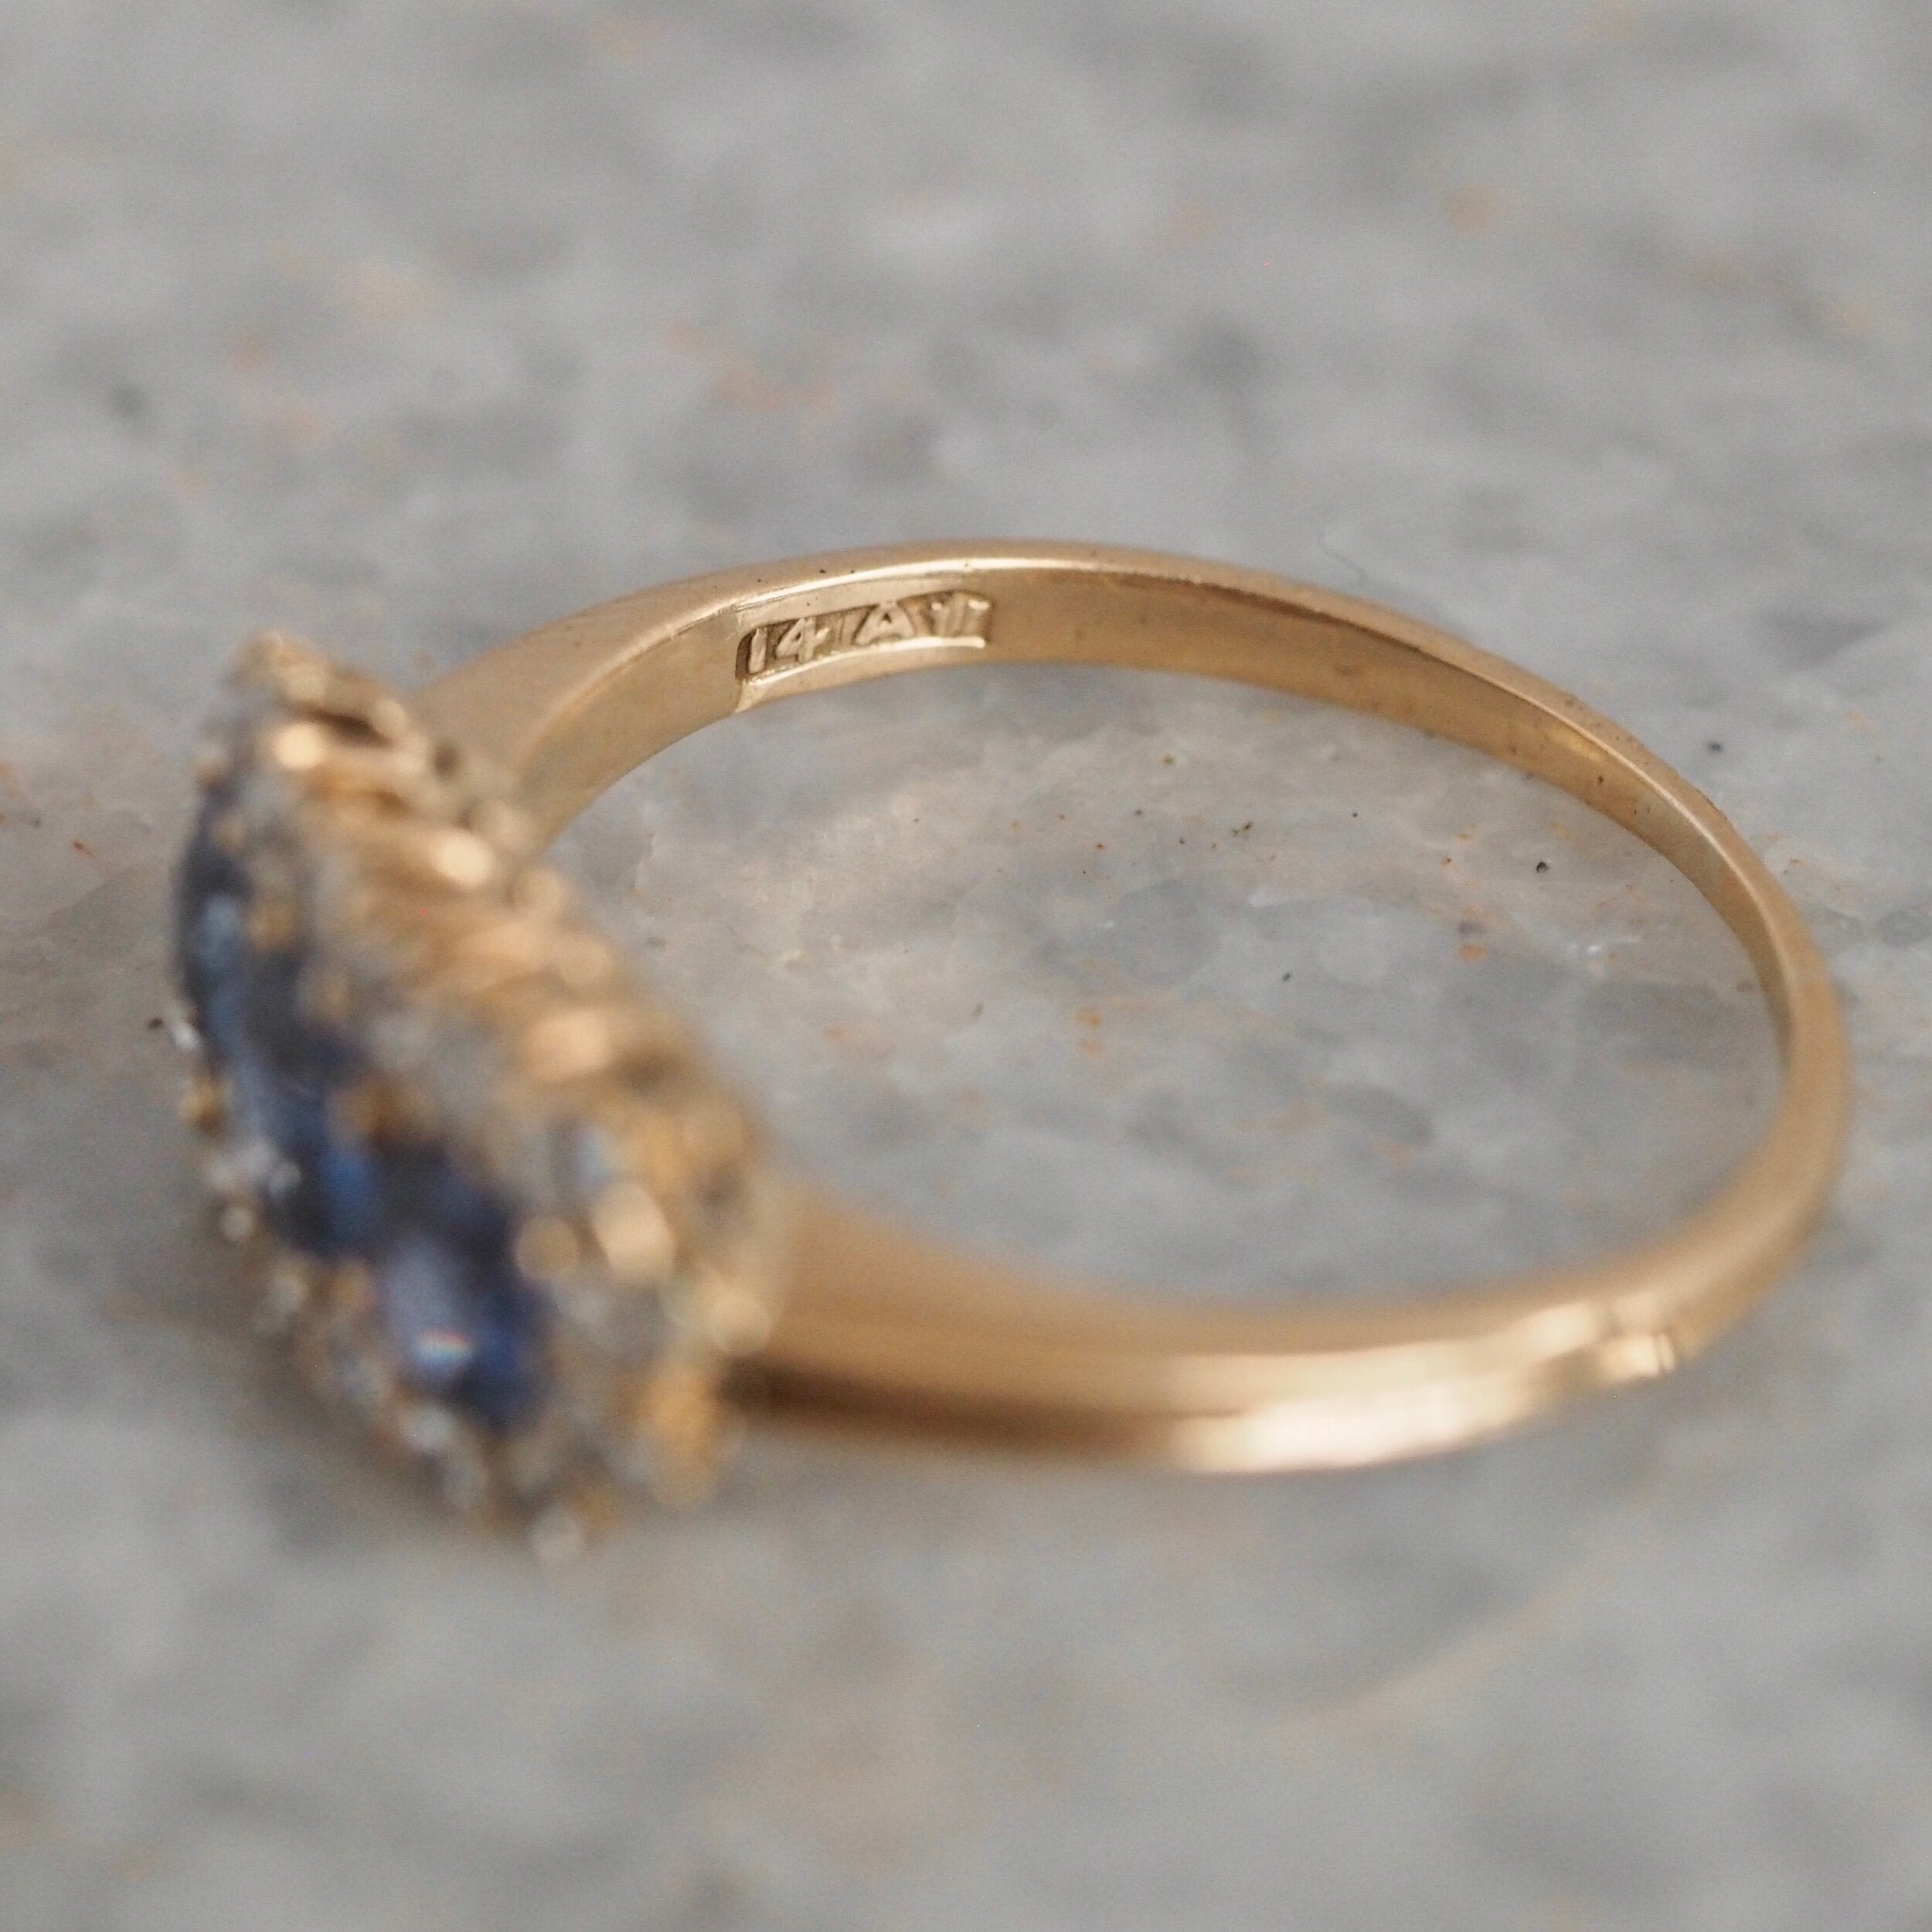 Antique Victorian 14k Gold Natural Sapphire and Old Mine Cut Diamond Ring